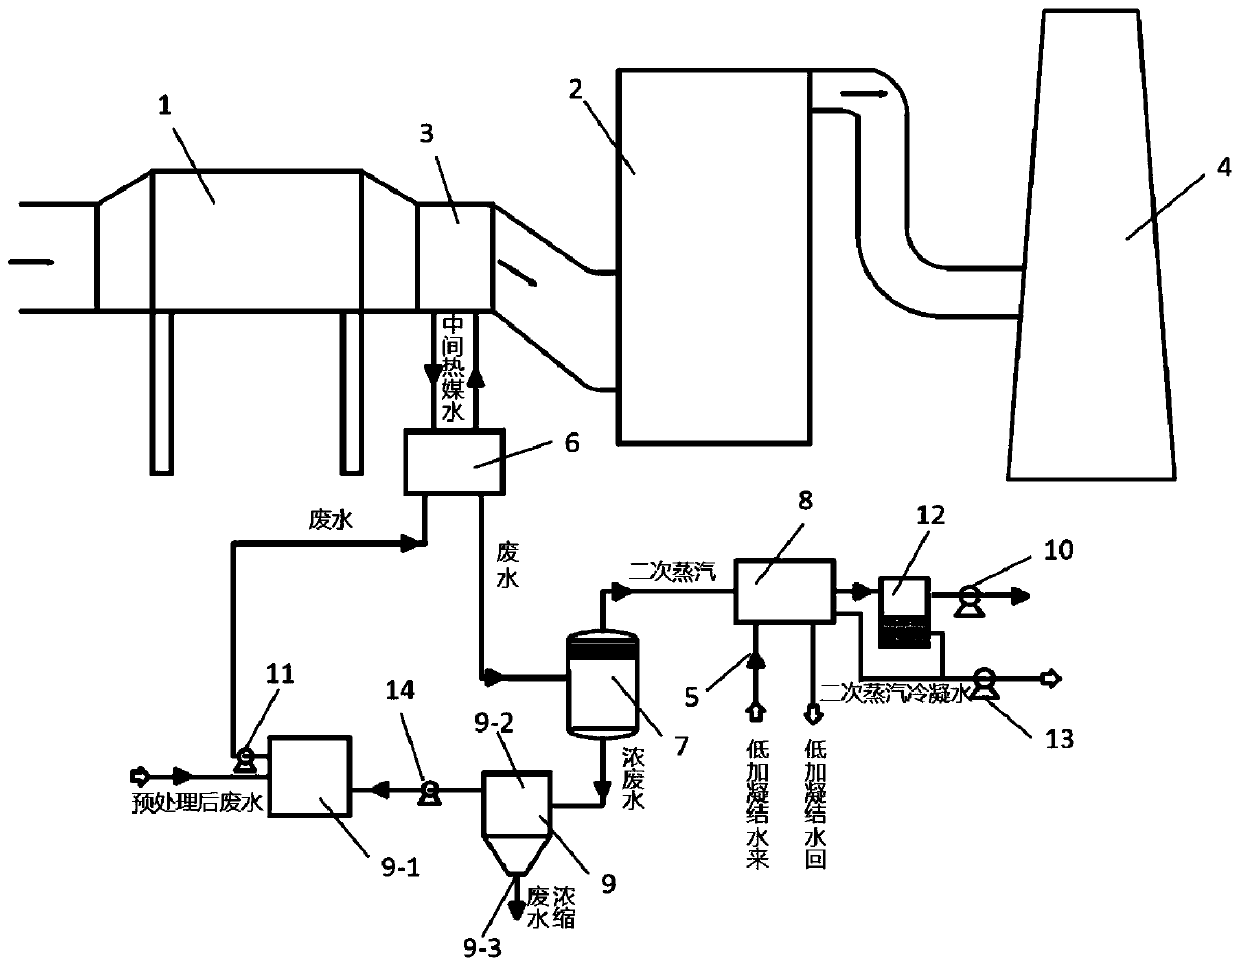 System for concentrating wastewater by heating via low-temperature flue gas